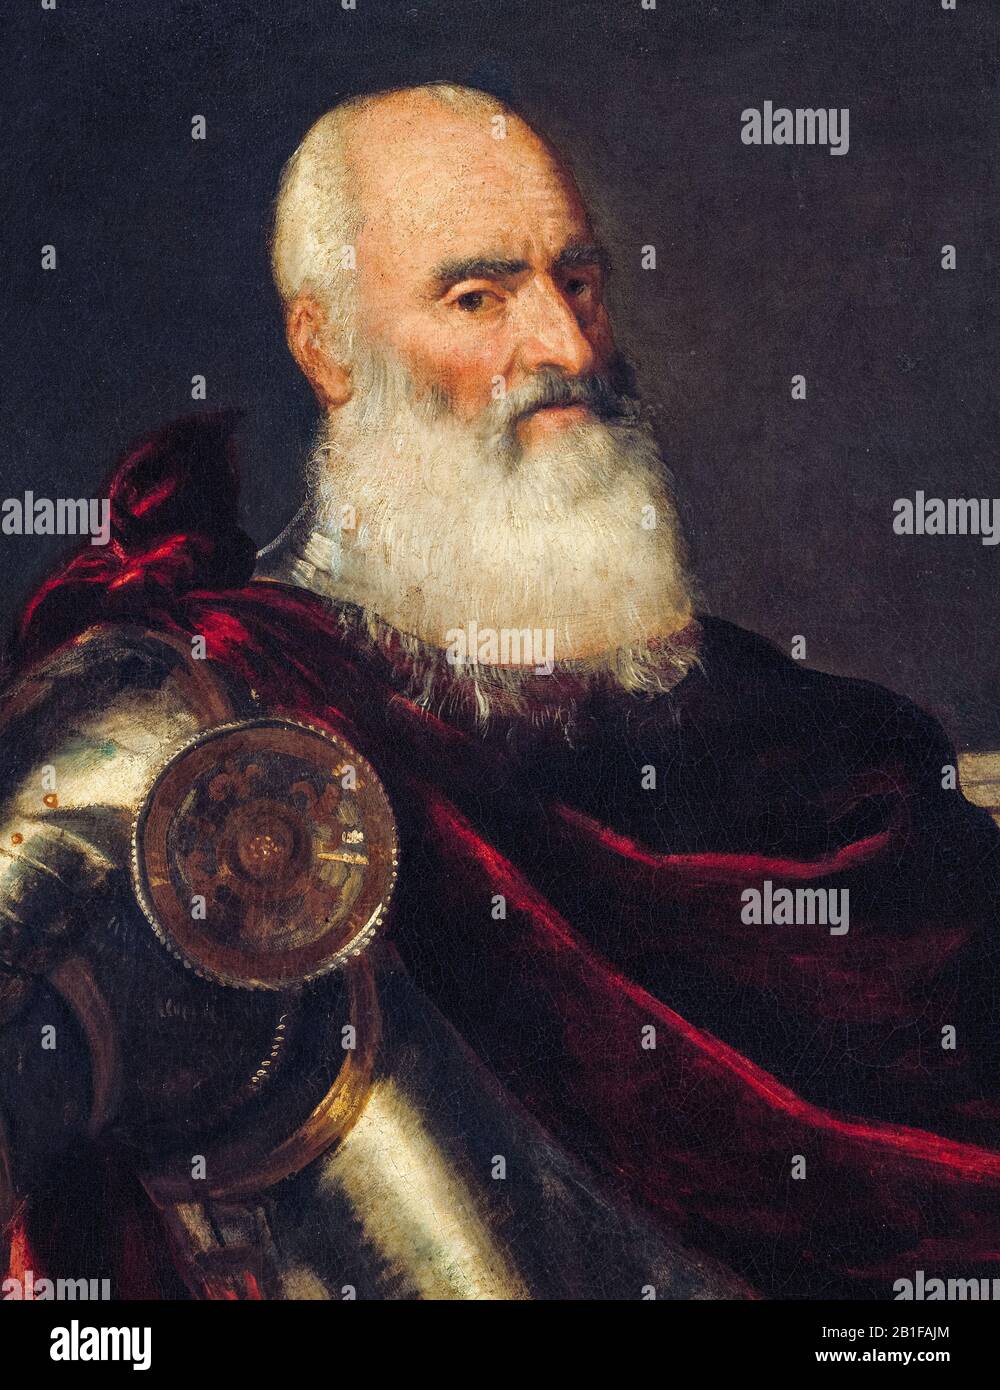 Vincenzo Cappello (1469-1541), Venetian Navy Admiral, full armour, portrait painting (detail) by Titian, Tiziano Vecellio, circa 1540 Stock Photo